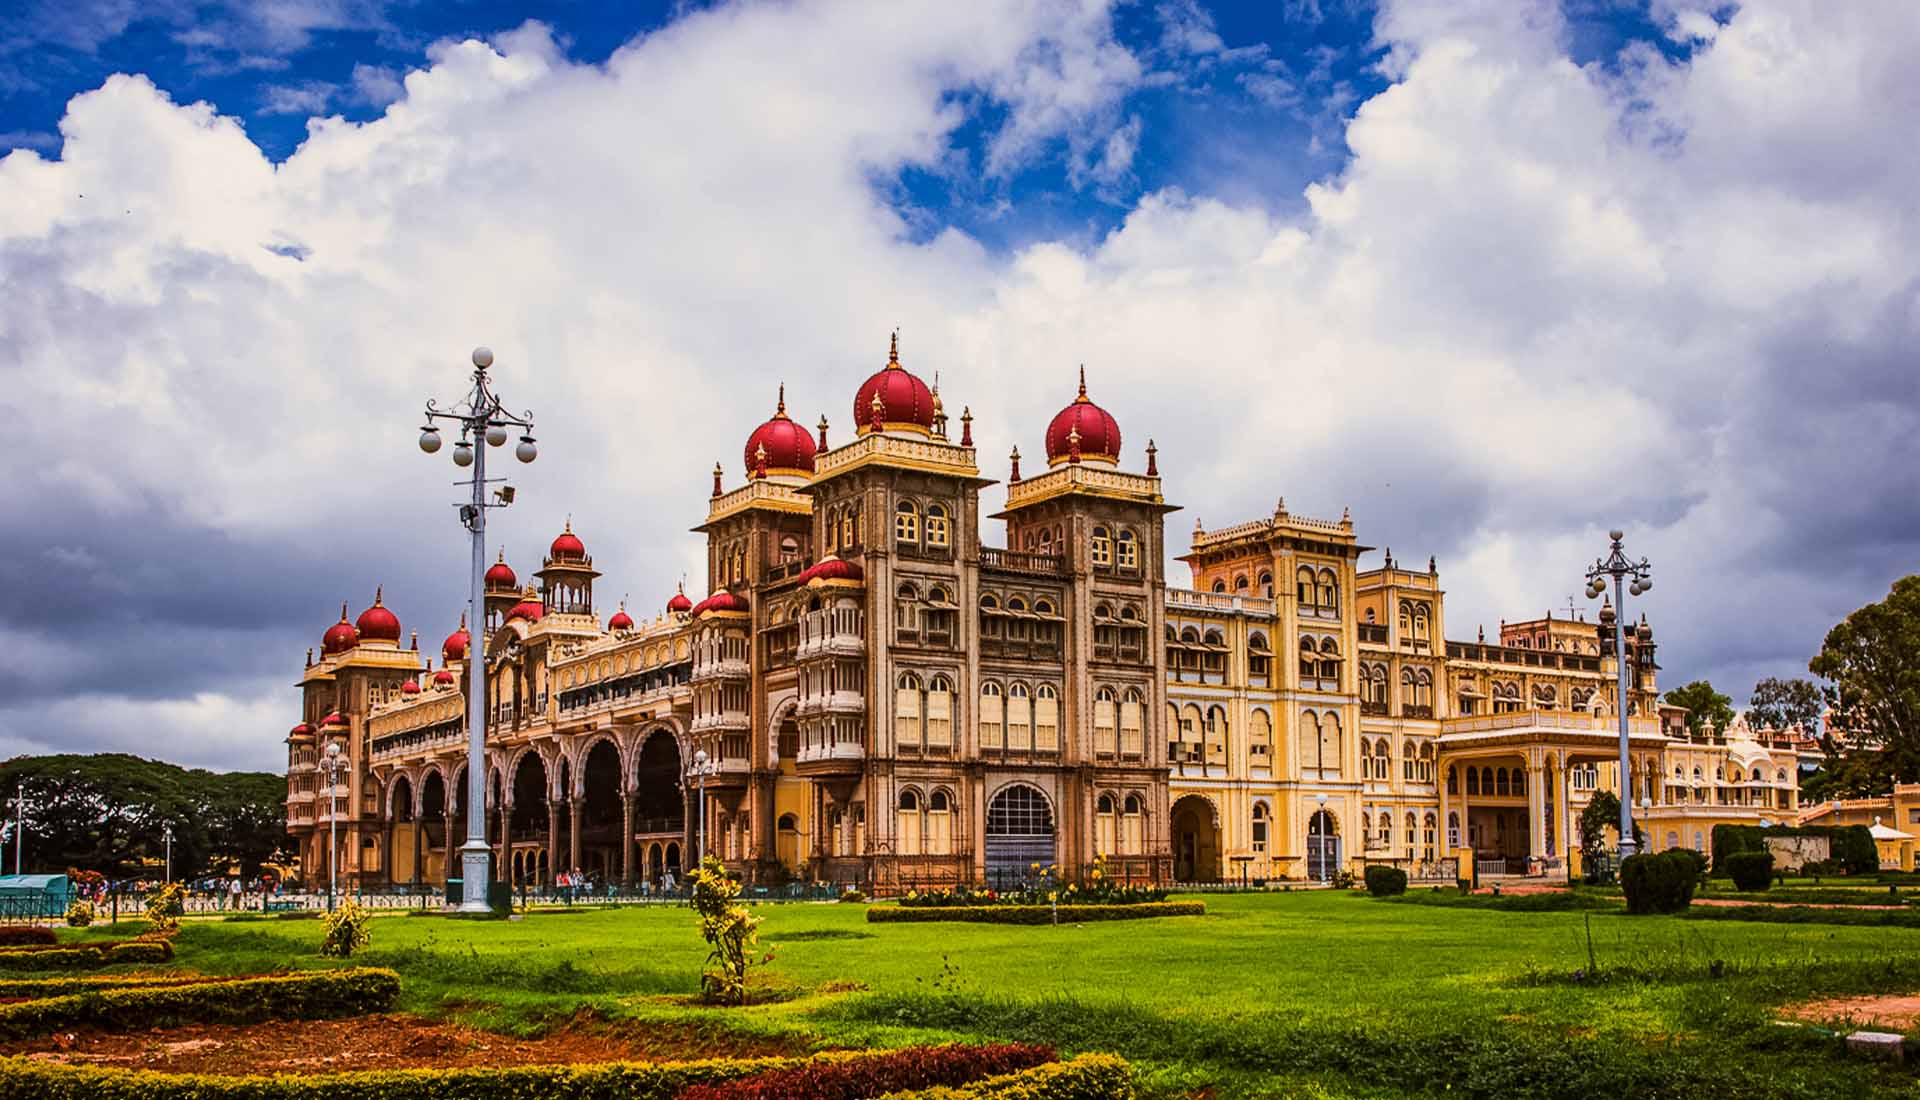 Stakeholders call for promoting Mysuru as a MICE destination amid visitor surge